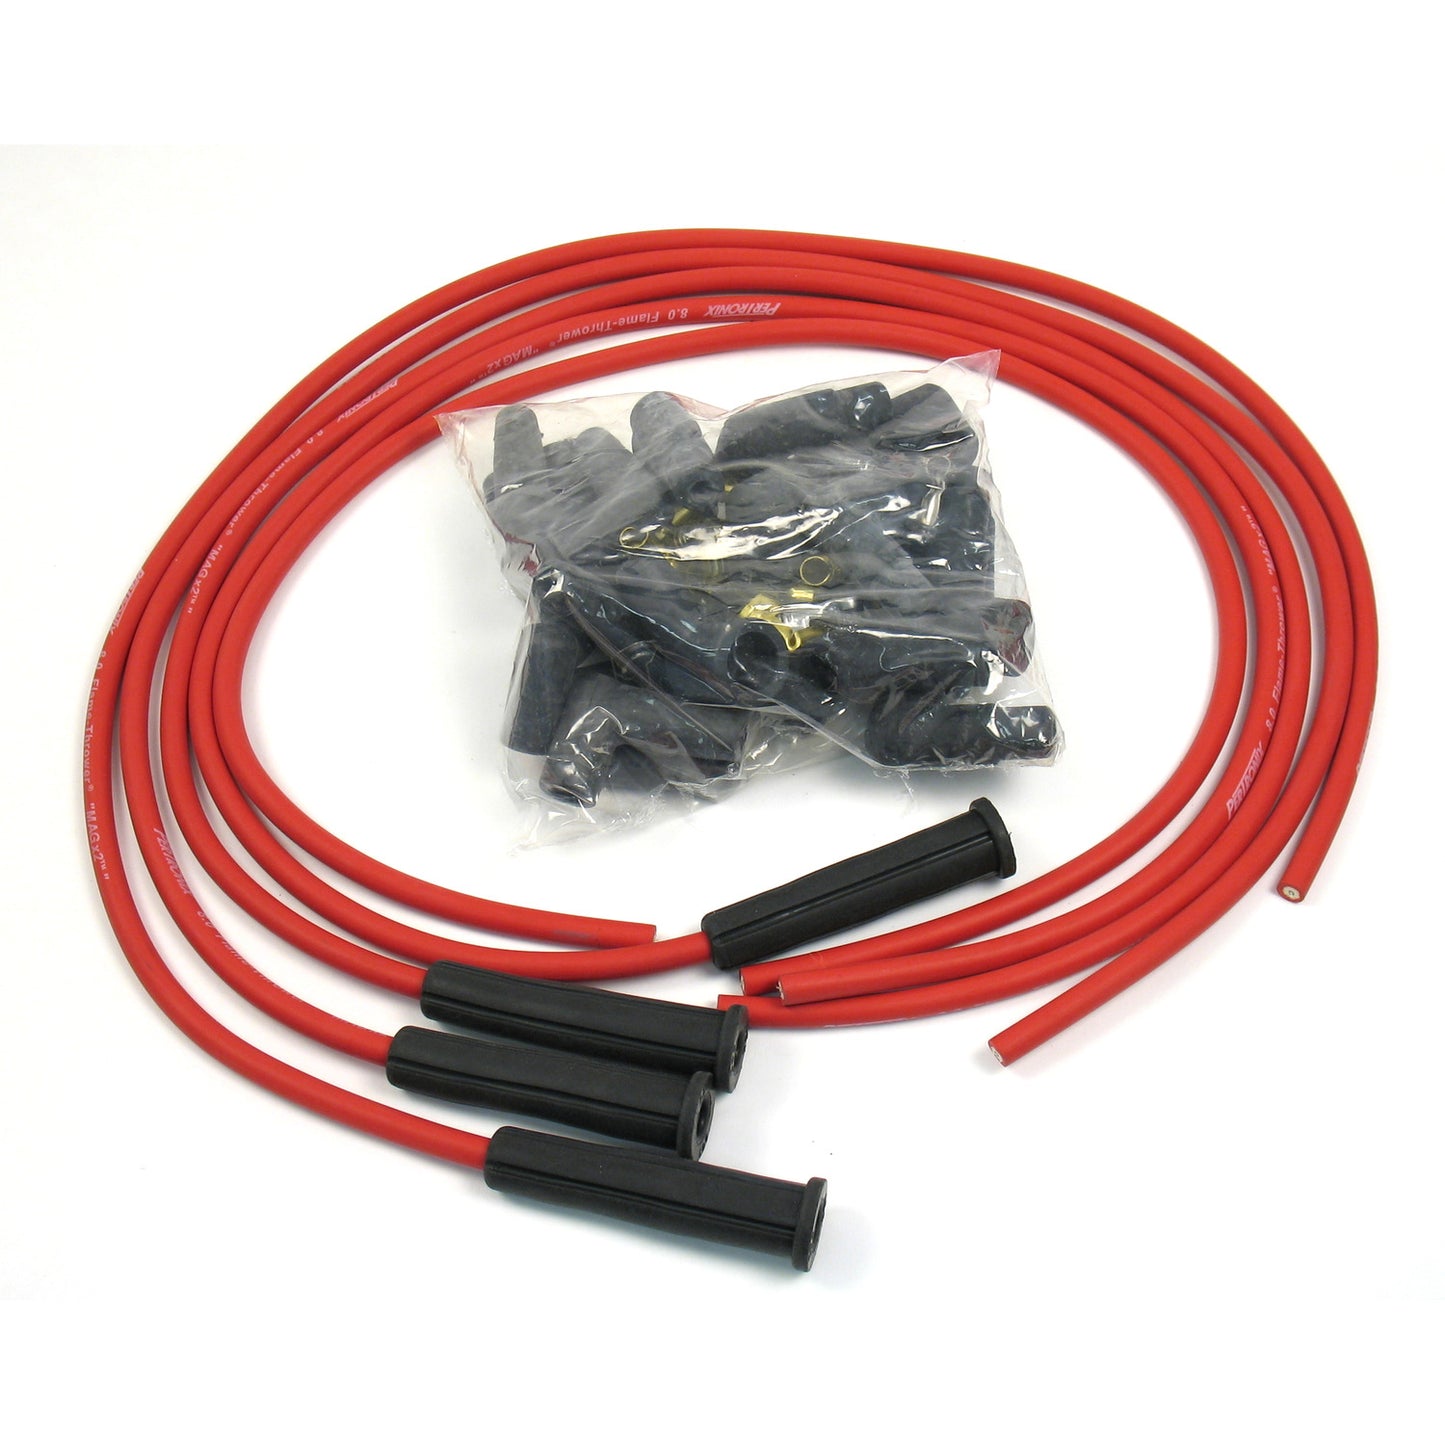 PerTronix 804480 Flame-Thrower Spark Plug Wires 4 cyl 8mm Universal 180 Degree Red